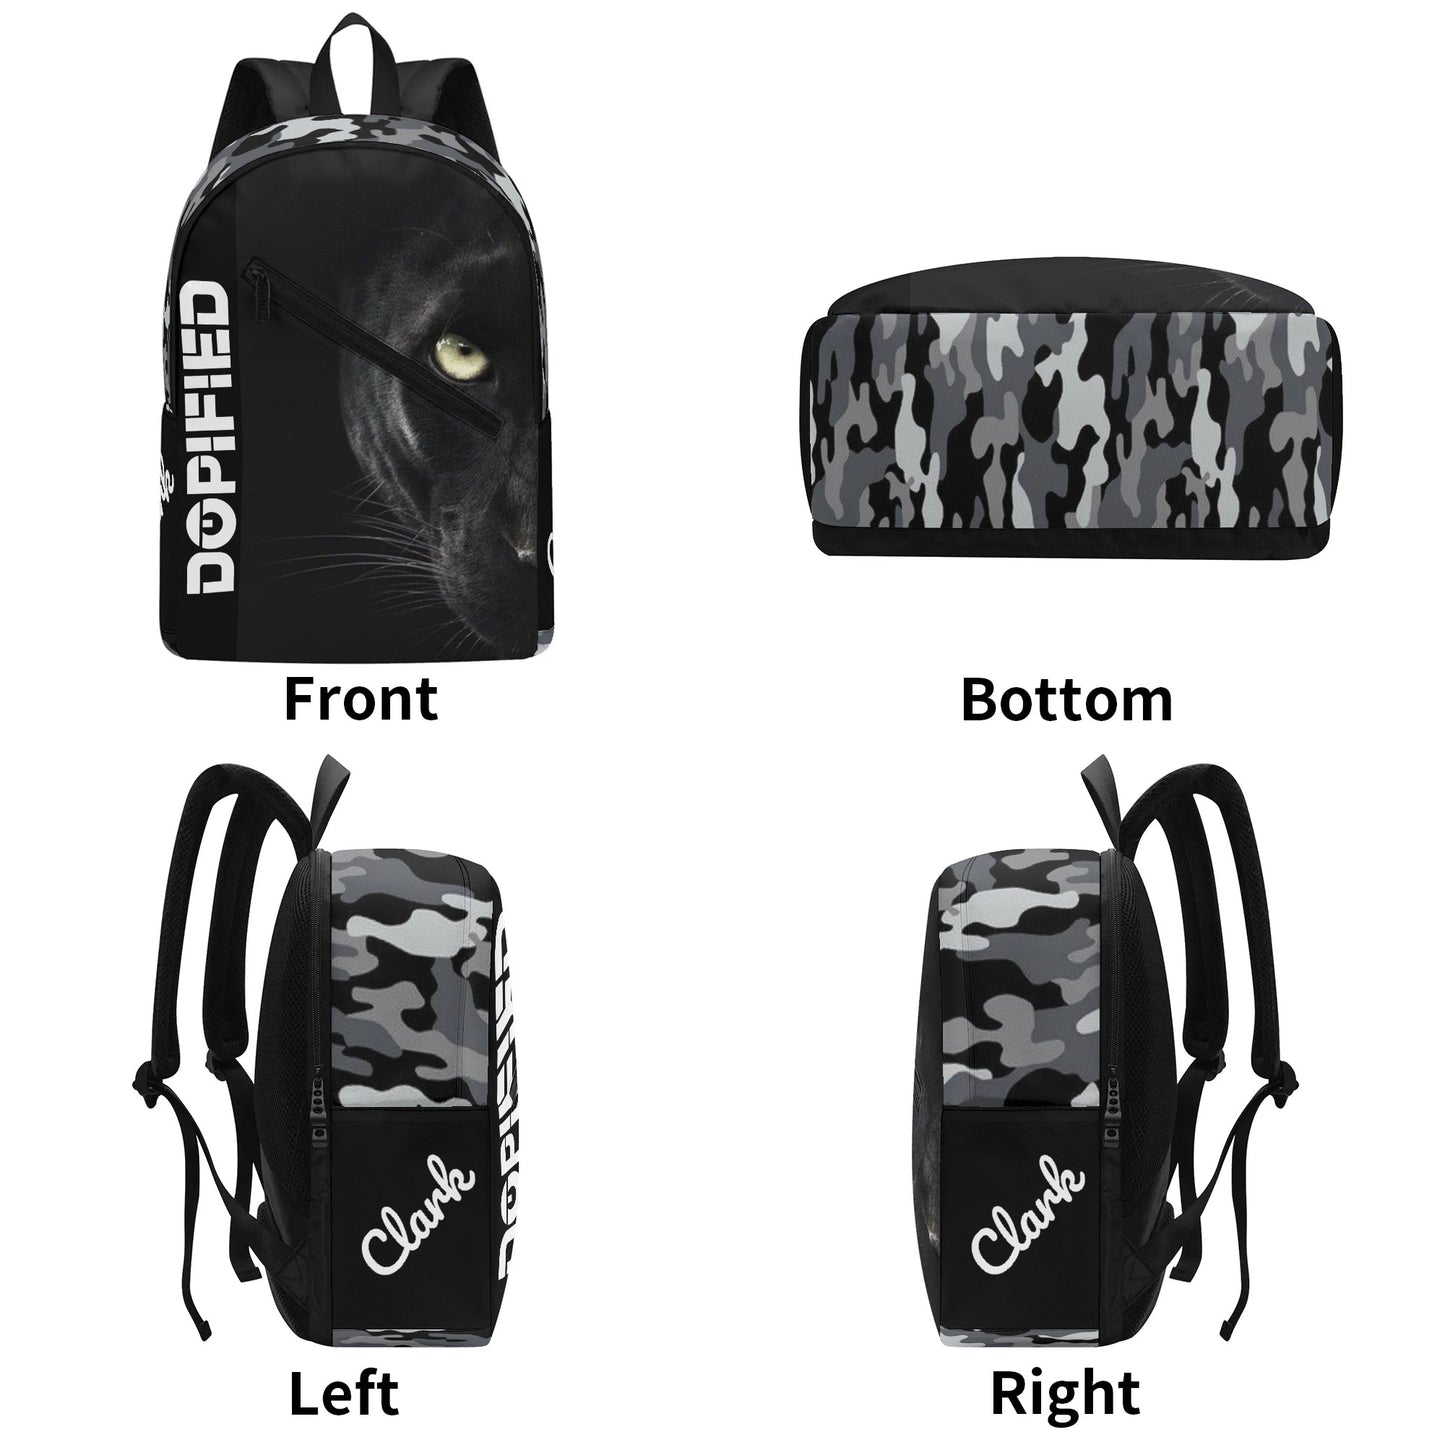 DOPiFiED Panther Laptop Backpack